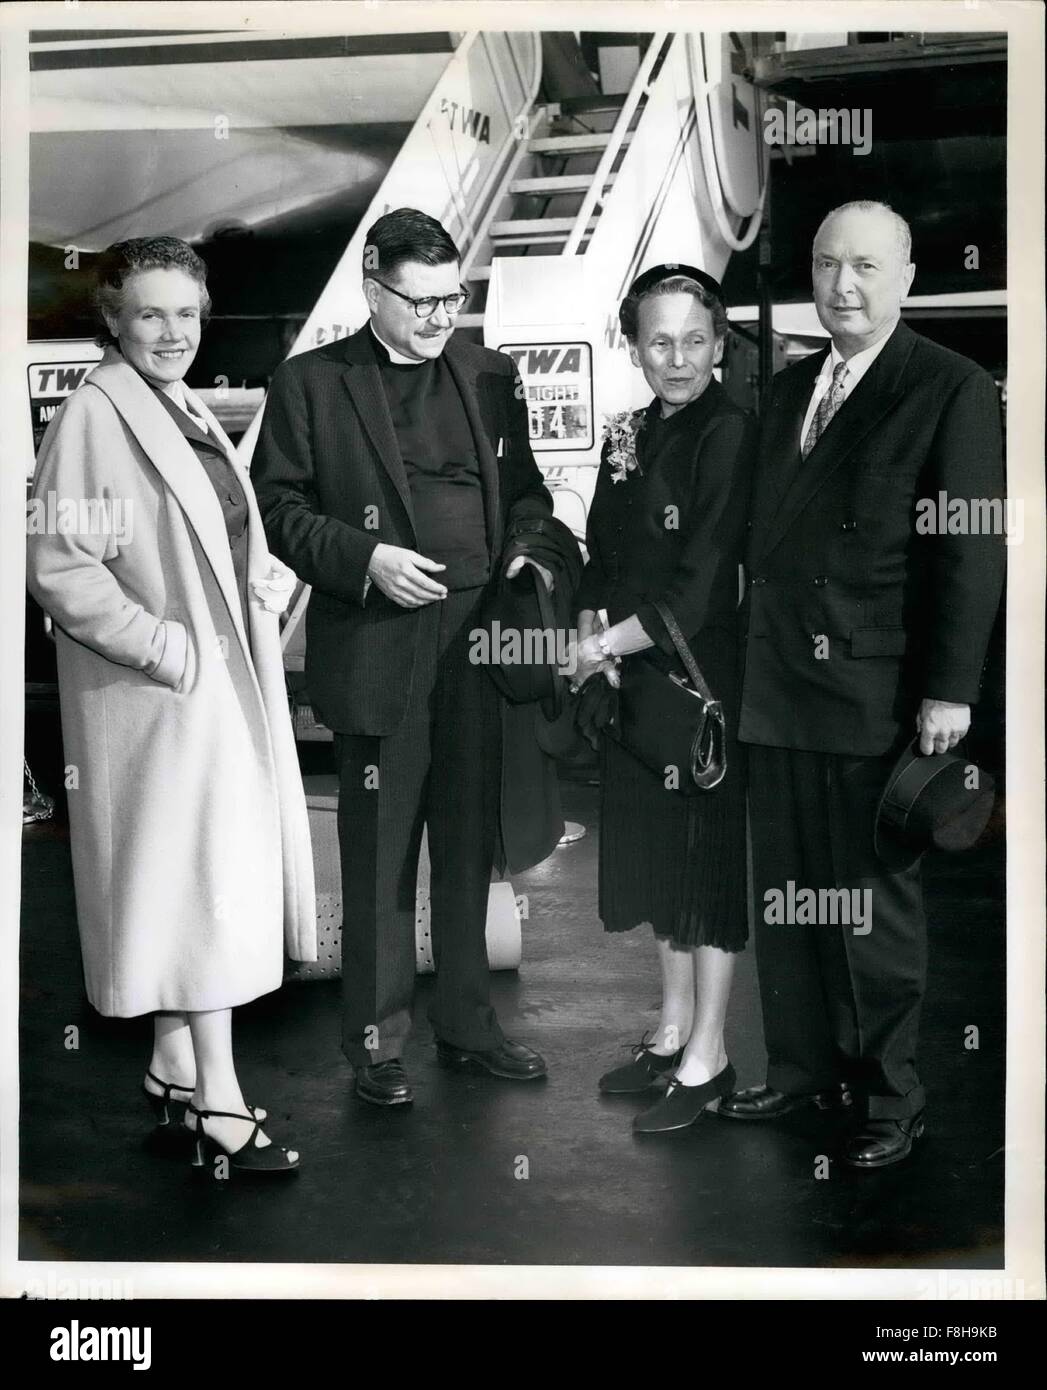 1962 - Idlewild Airport, N.Y., Oct. 15 -- Fore Members Of The Zellerbabh Commission Of The International Rescue Committee Are Shown As They Boarded A Twa Plane Here Today For Geneva. They Are Members Of A Commission Of Eight Persons Which Will Study The Plight Of Nearly 250,000 Refugees From Behind The Iron Curtain Who Are Still Seeking Permanent Homes In The Free World. The Commission, Some Of Whose Members Are Already In Europe, Will Visit Refugee Camps In Yugoslavia, Austria, Germany, France, Switzerland & Italy. (Left To Right) Eugenie Anderson, Former U.S. Ambassador To Denmark; Dean Jame Stock Photo